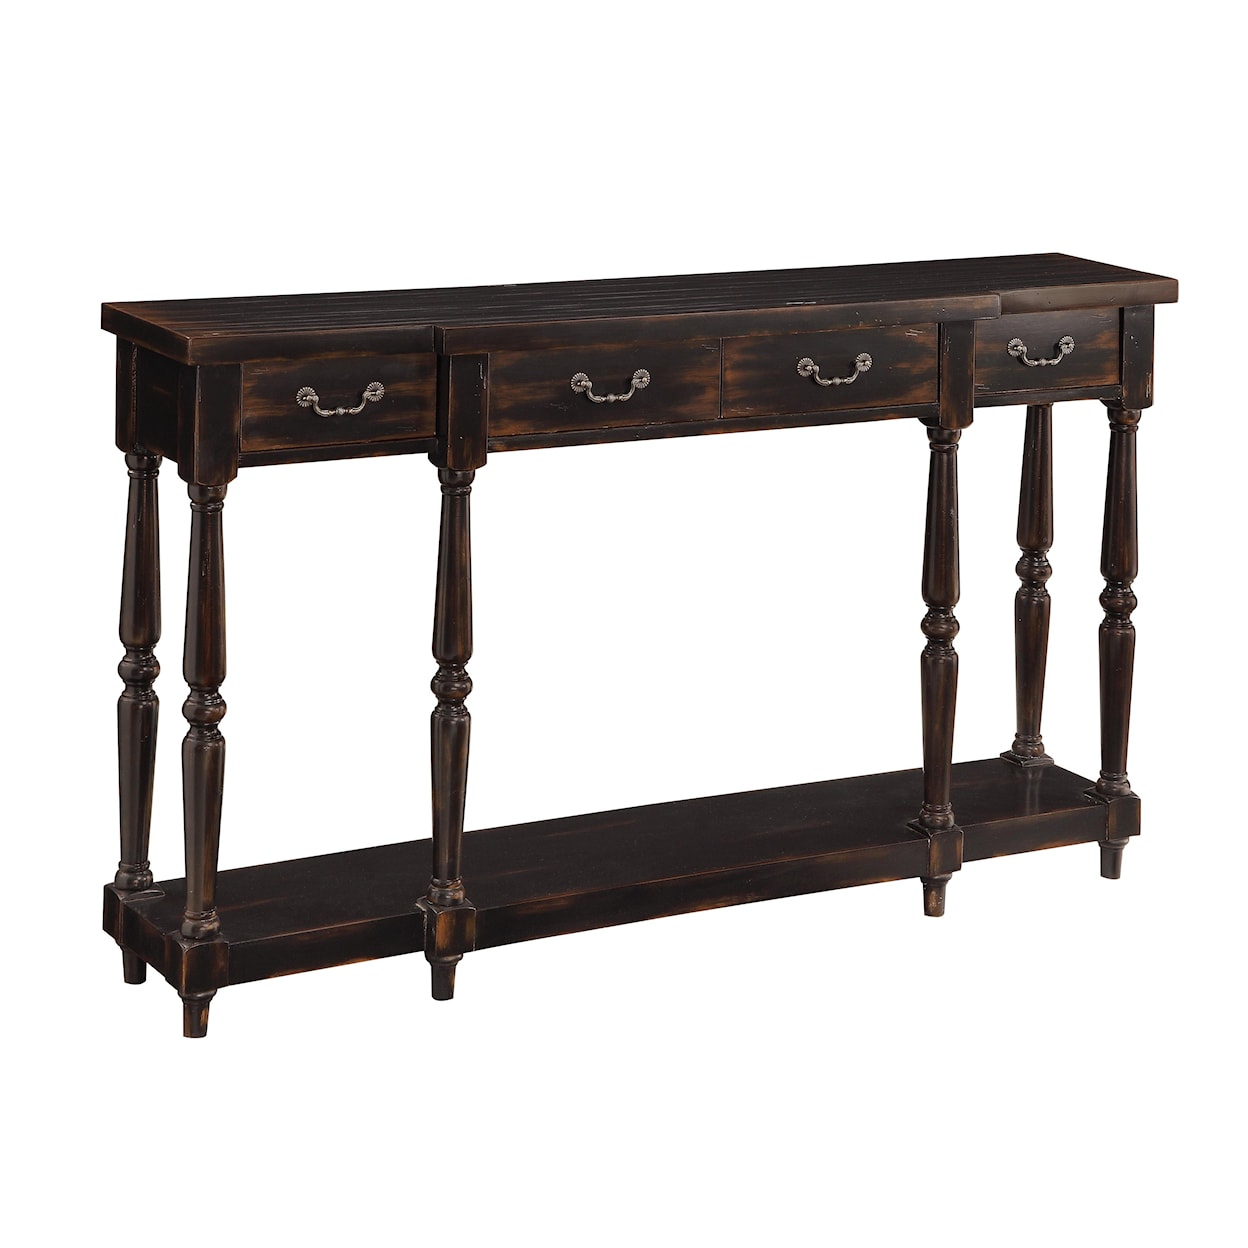 Ruby-Gordon Accents Accents by Andy Stein 4 Drawer Console